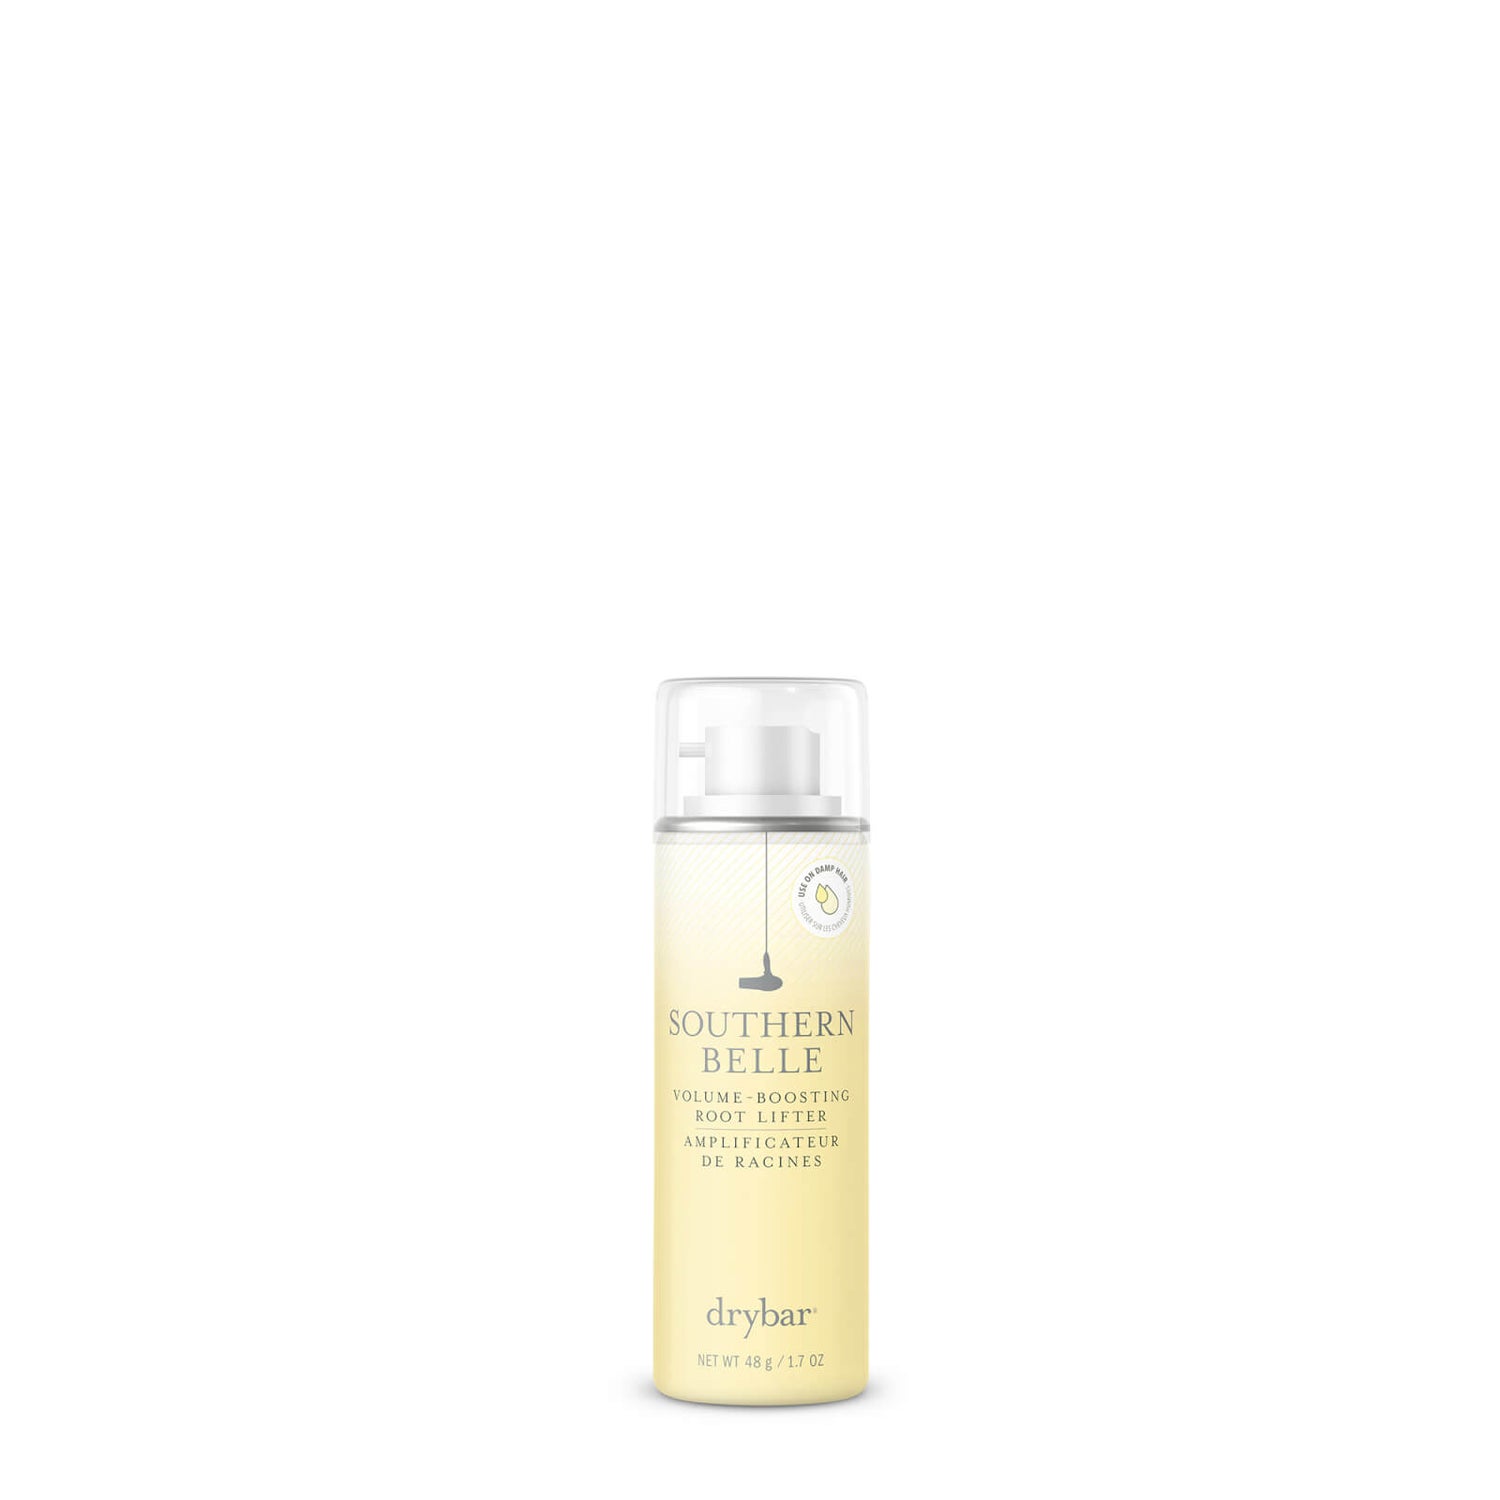 Drybar Southern Belle Volume-Boosting Root Lifter Travel Size 48g